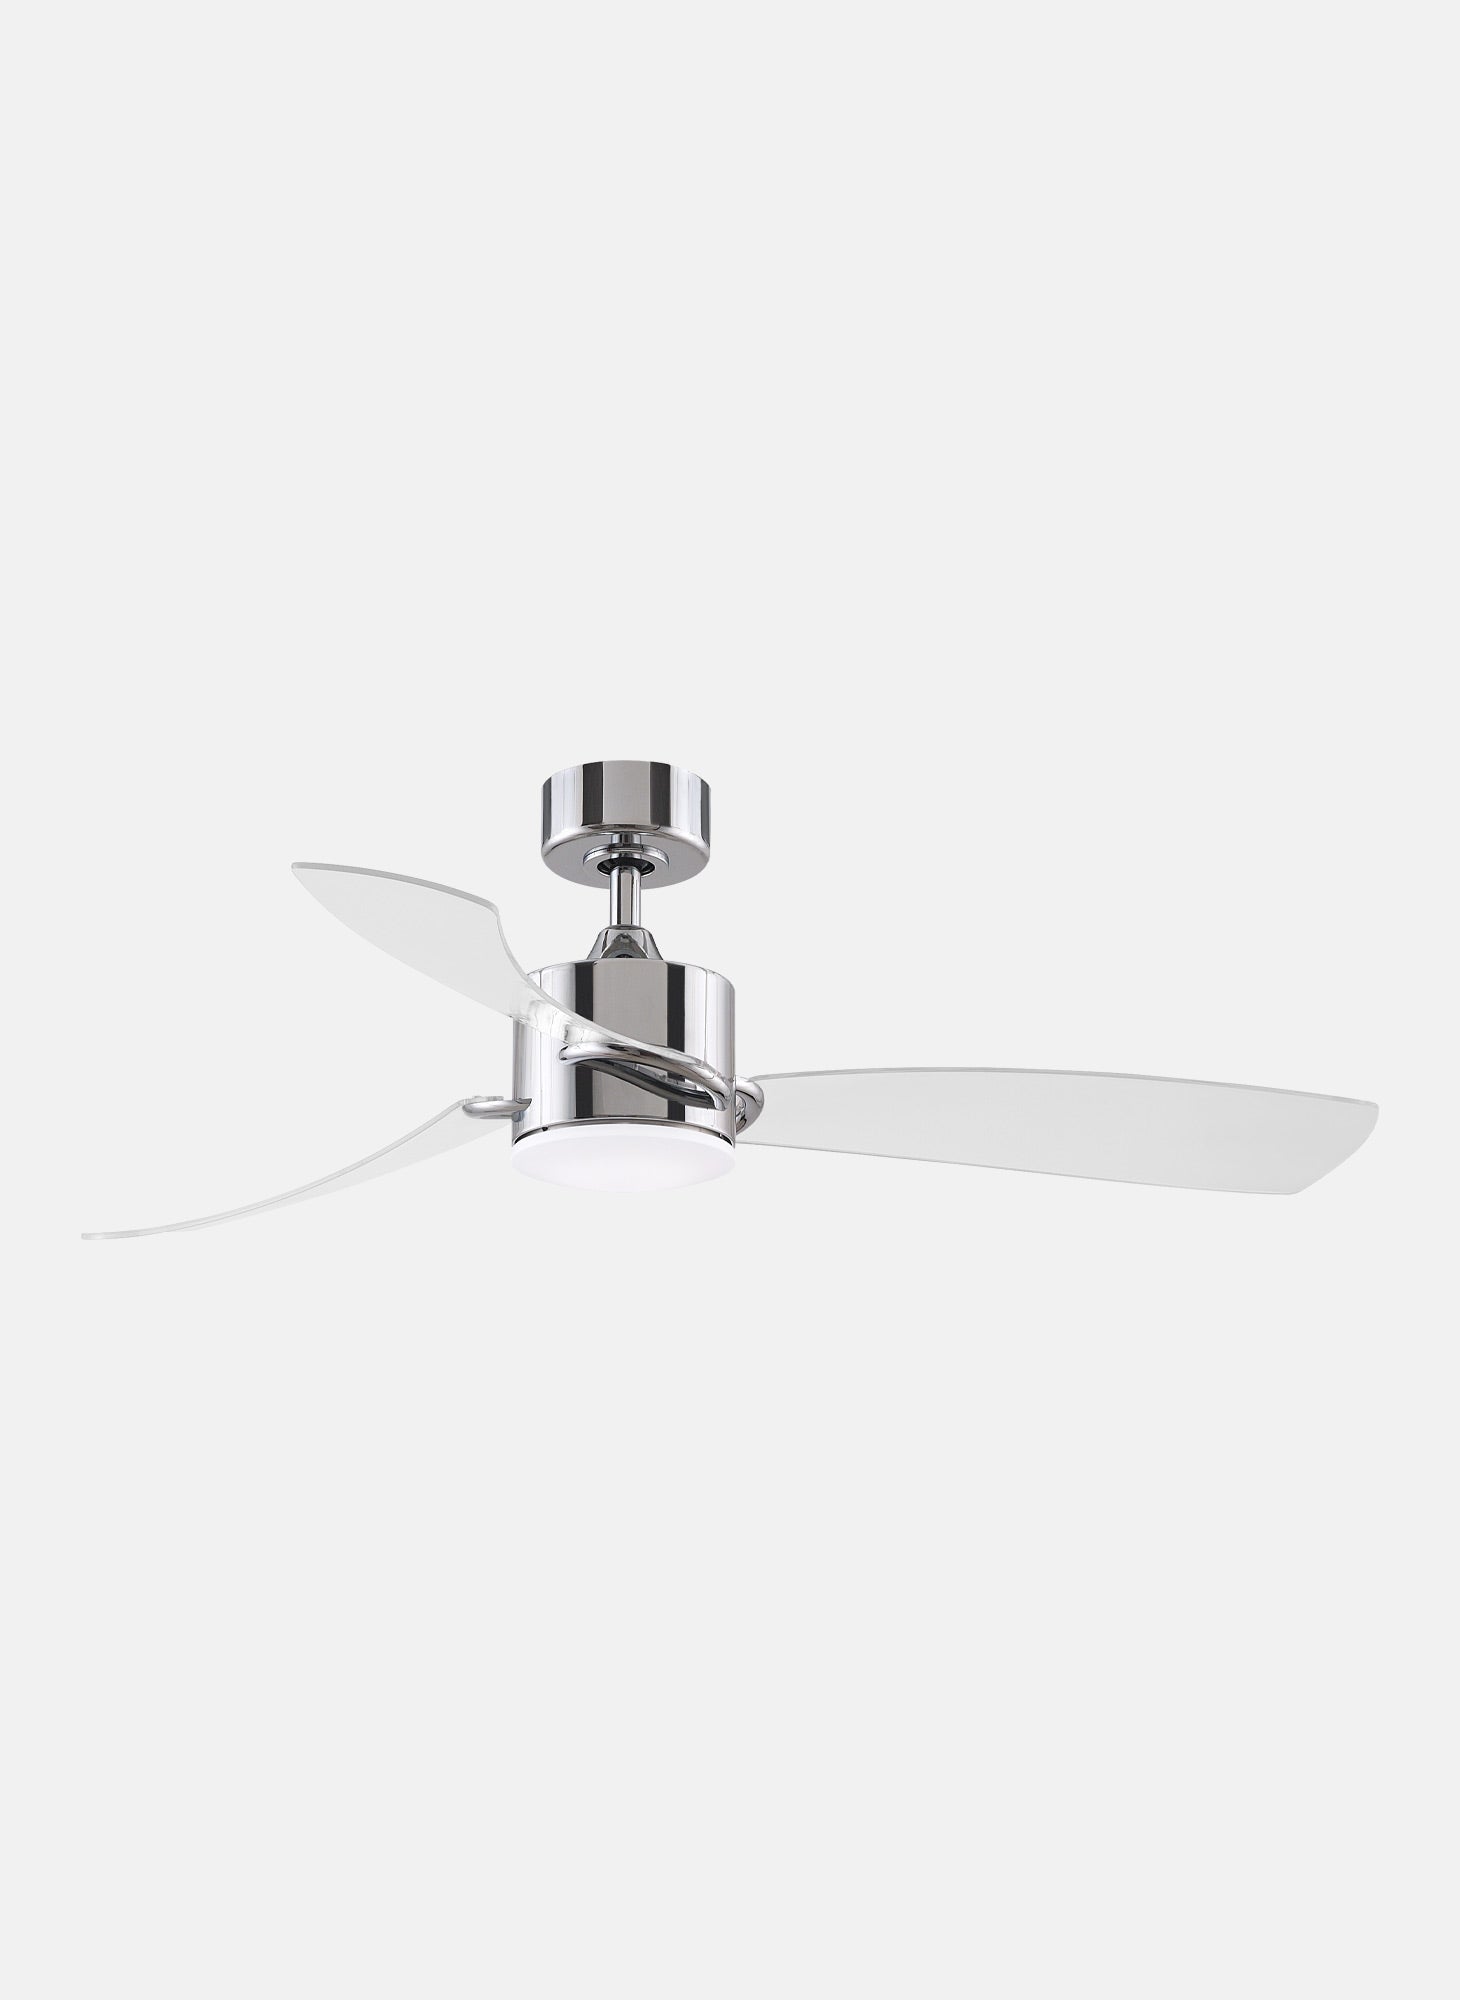 Fanimation SculptAire 52 inch with LED Light Ceiling Fan FP8511 Ceiling Fan Fanimation Chrome with Clear  